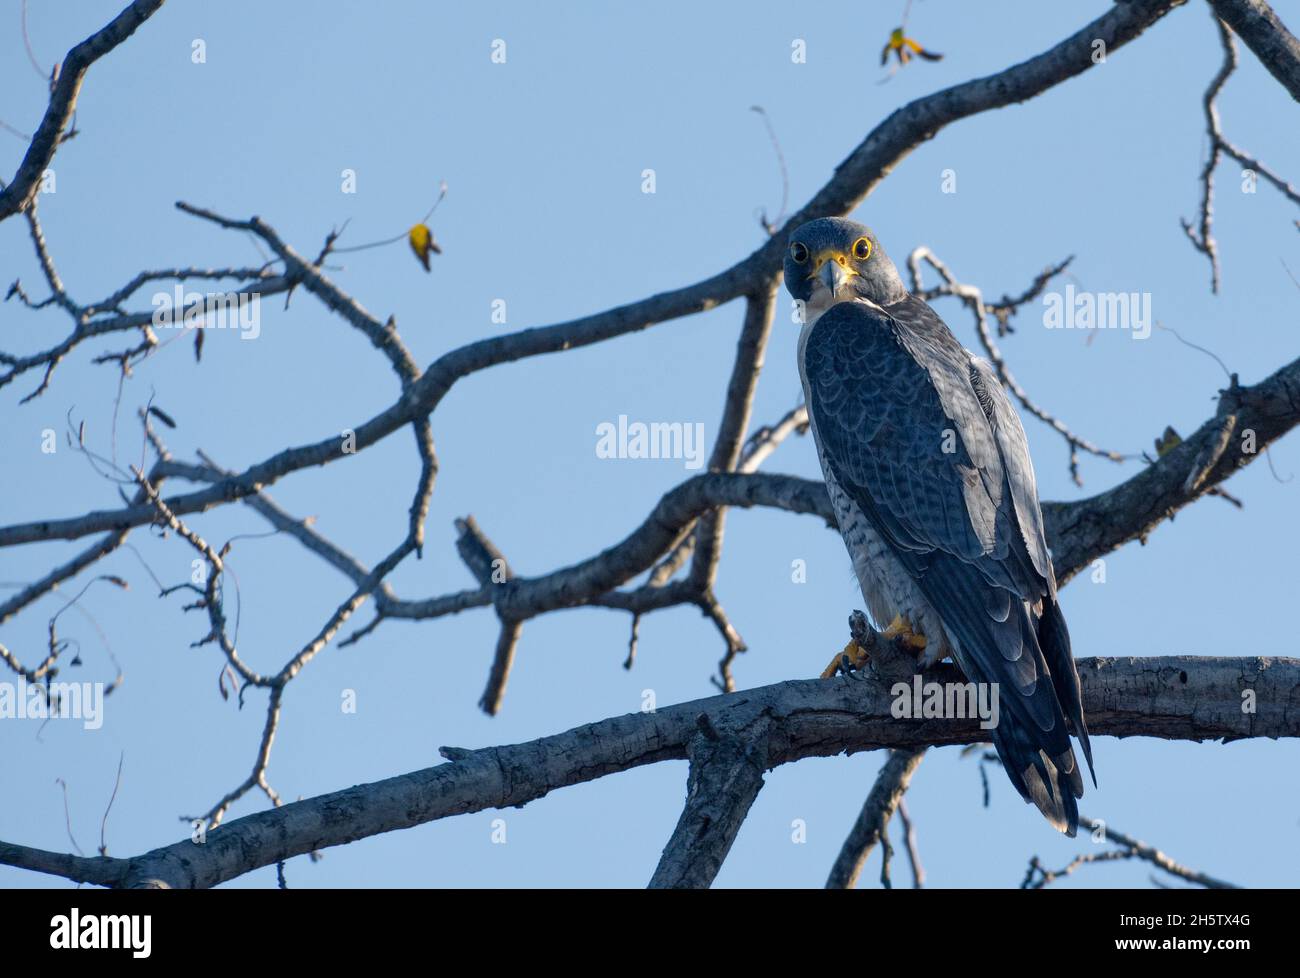 A peregrine falcon (Falco peregrinus) perches on a branch and looks into the camera, in Woodland Hills, California USA Stock Photo